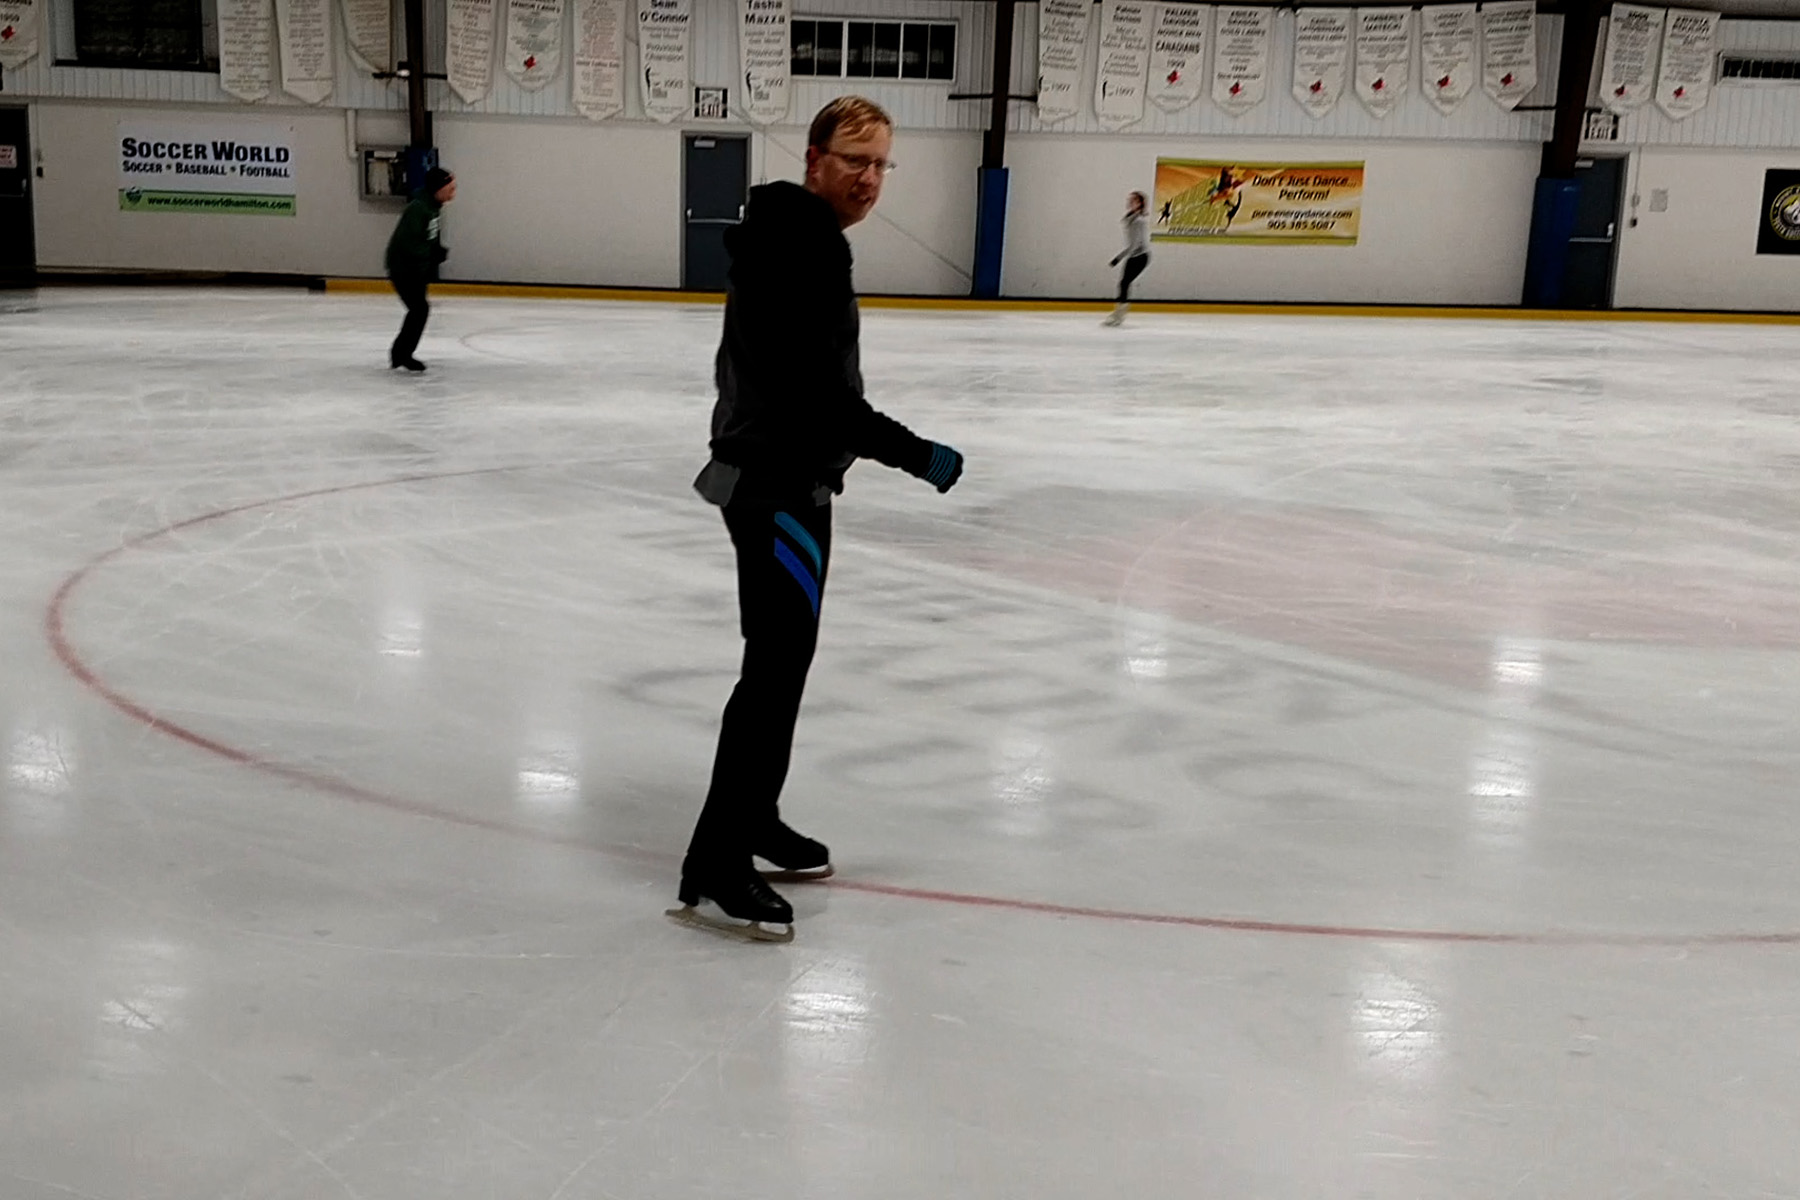 A middle aged blond man on figure skates, on a hockey rink.